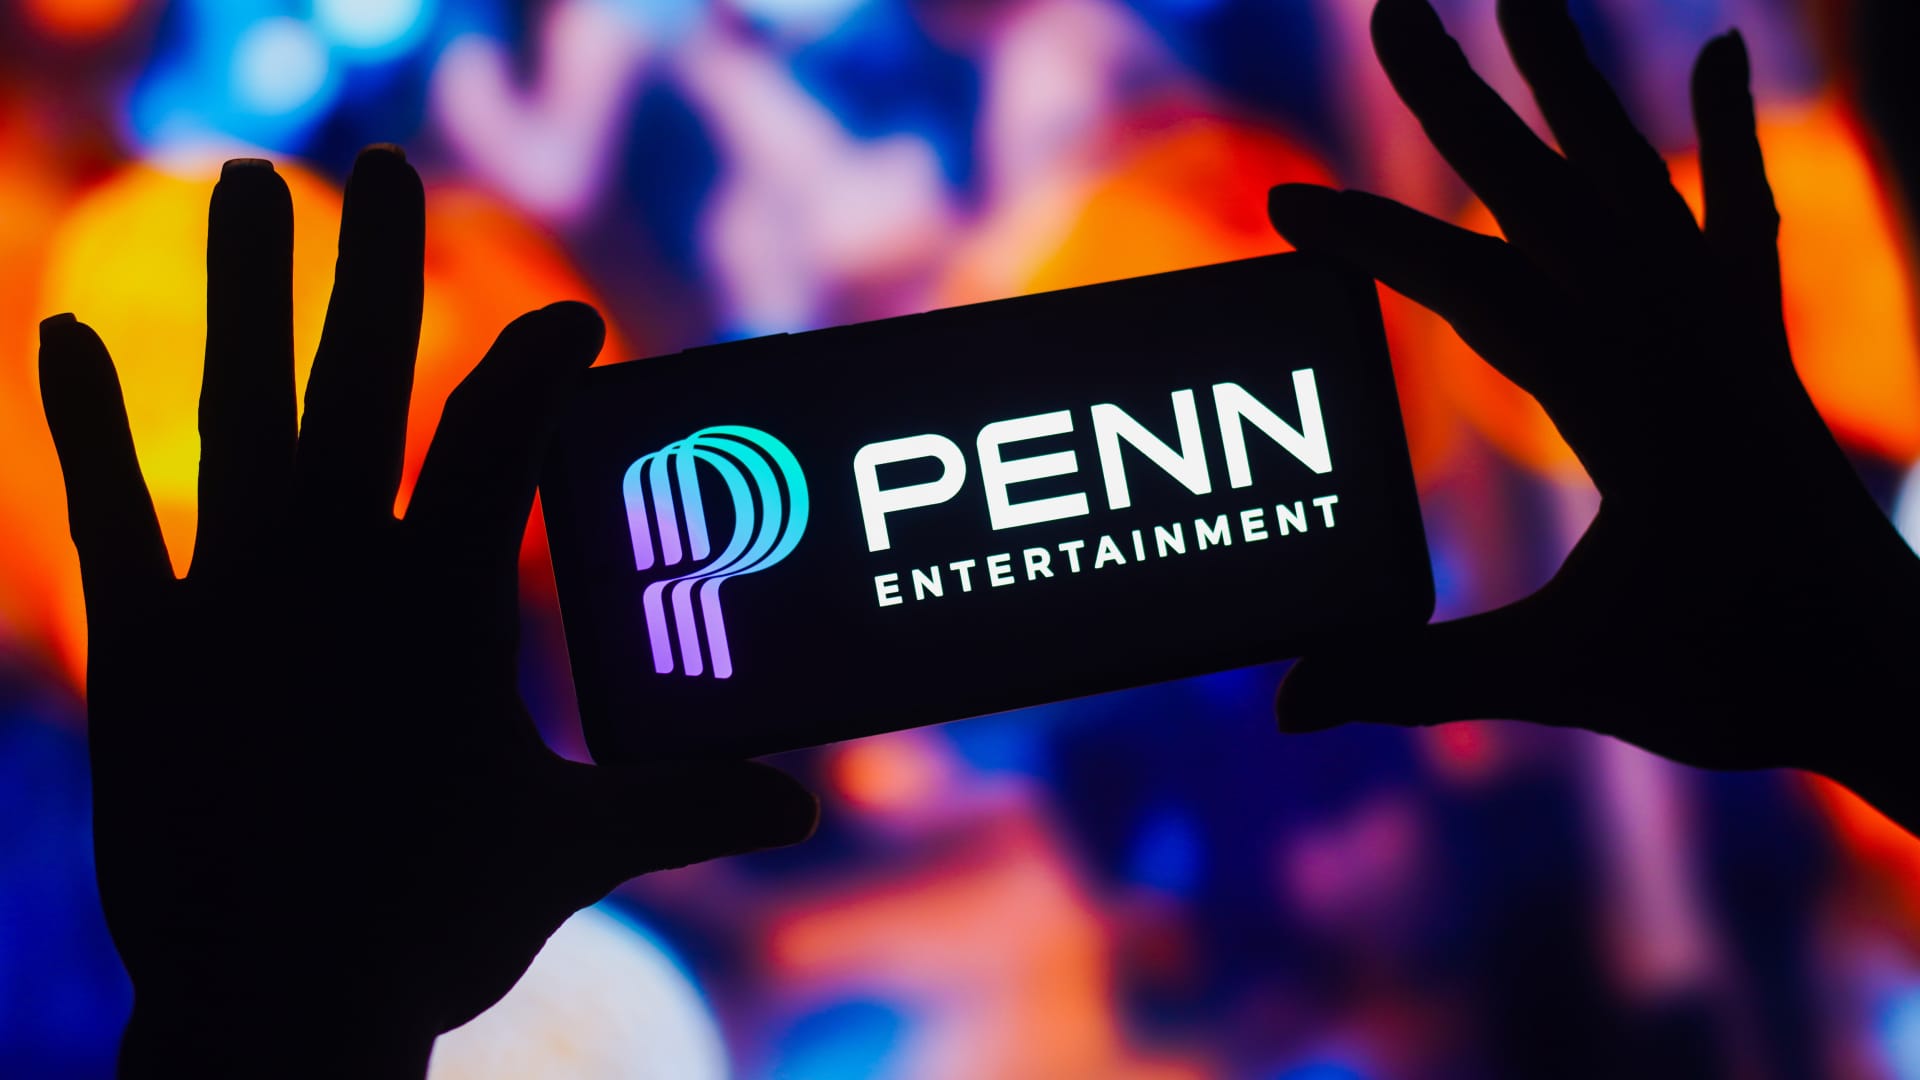 Penn sports betting business shows profit in fourth quarter